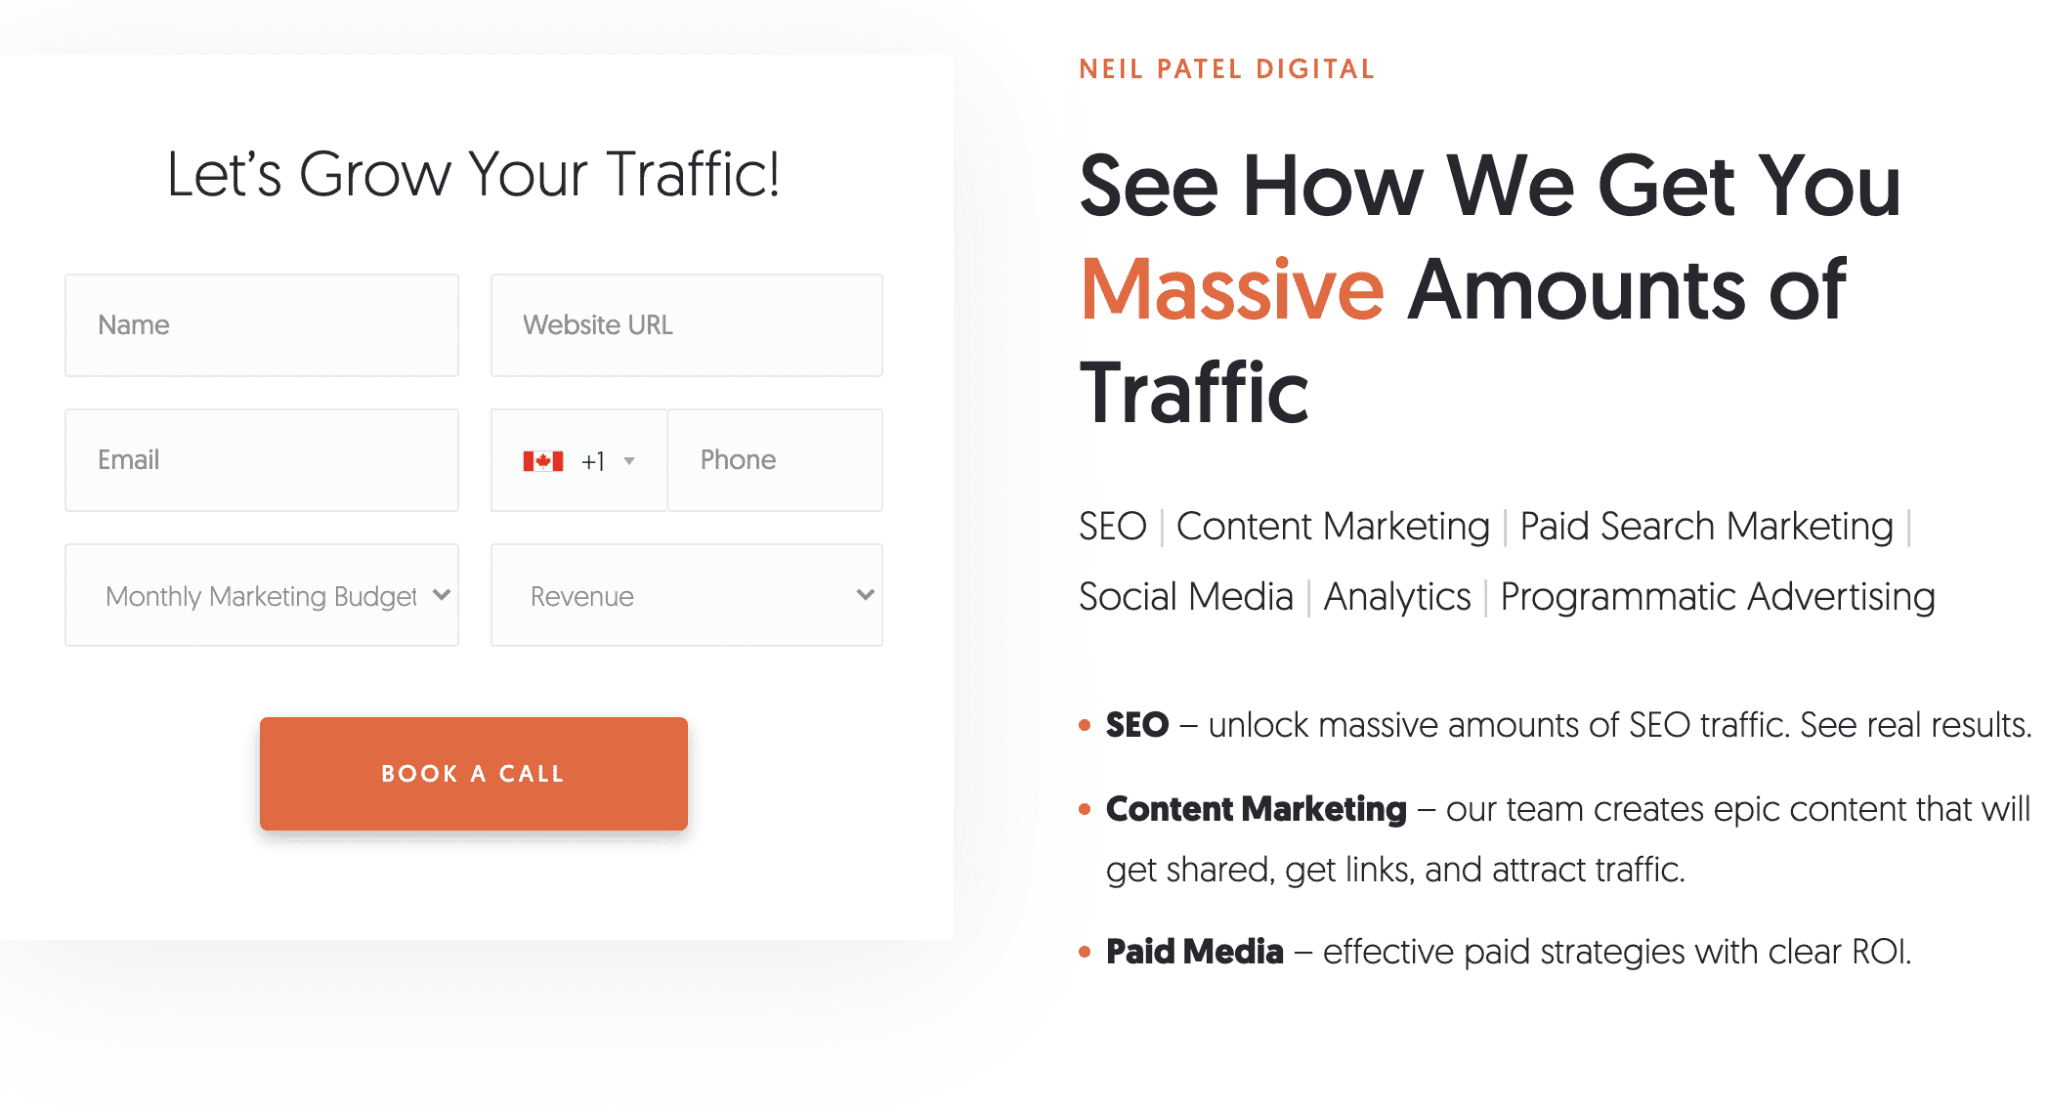 Screenshot of Neil Patel’s consultation services form to grow traffic